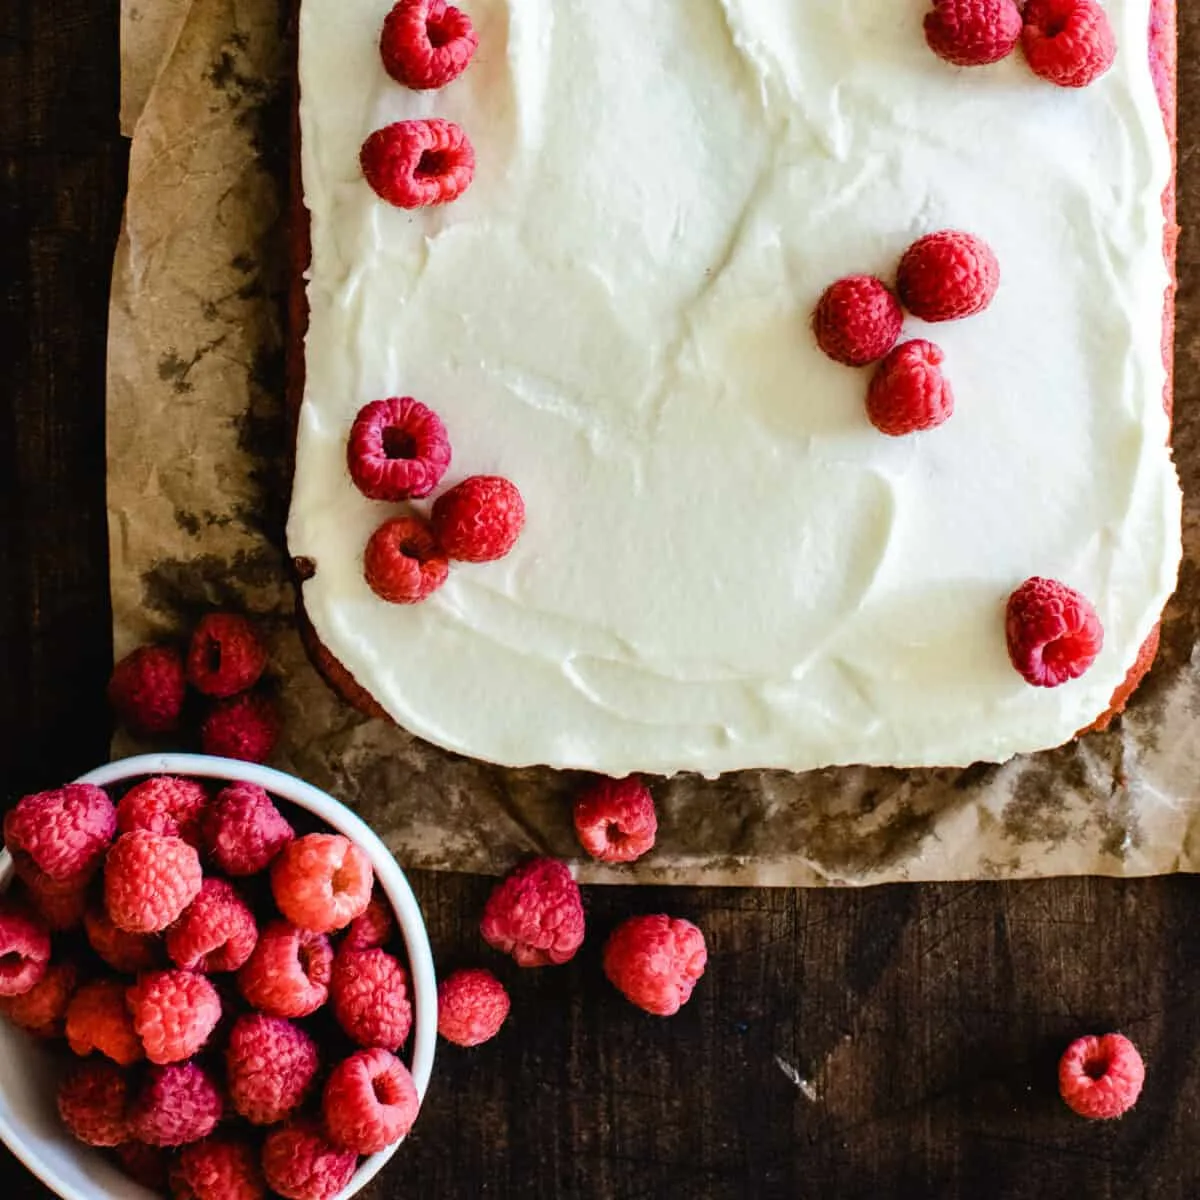 raspberry sheet cake on brown parchment paper with white frosting and bowl of fresh raspberries to decorate the top